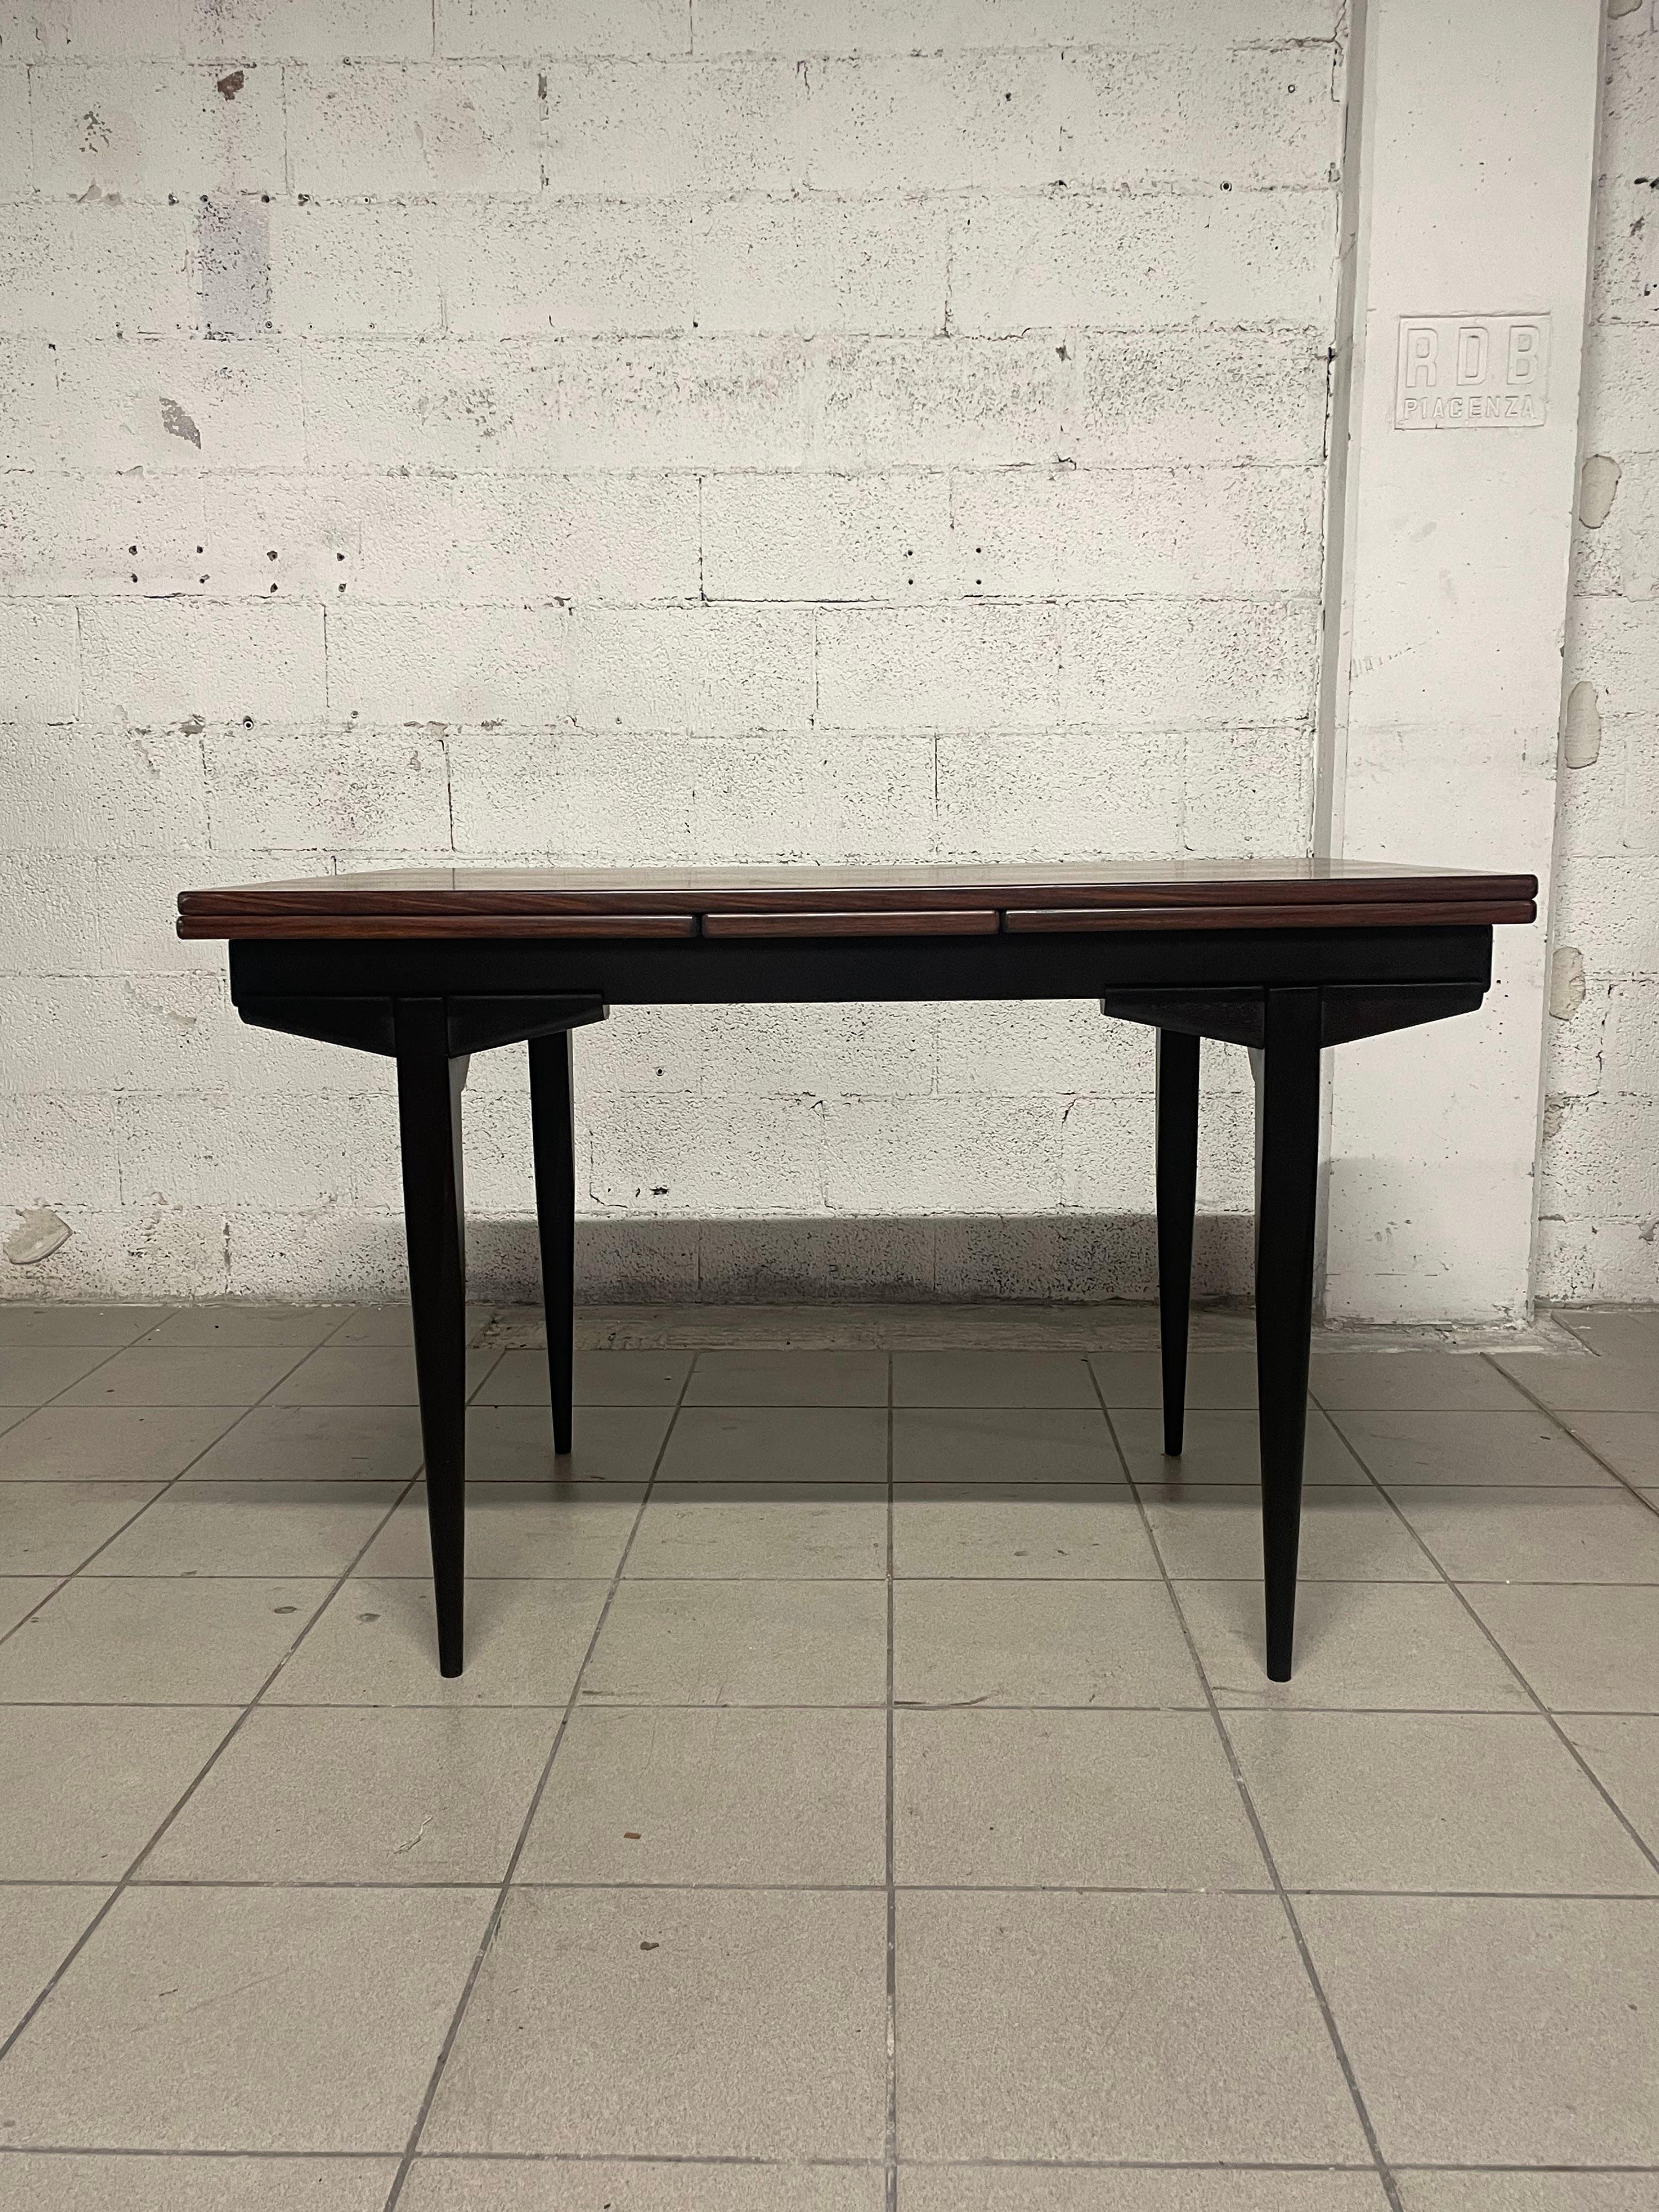 1960s pull-out extension table made of palisander wood with stained wood legs.

With both extensions open, the table reaches a length of 213 cm.
It is perfect for a living area where it can accommodate up to 12 comfortable people if needed.
Also